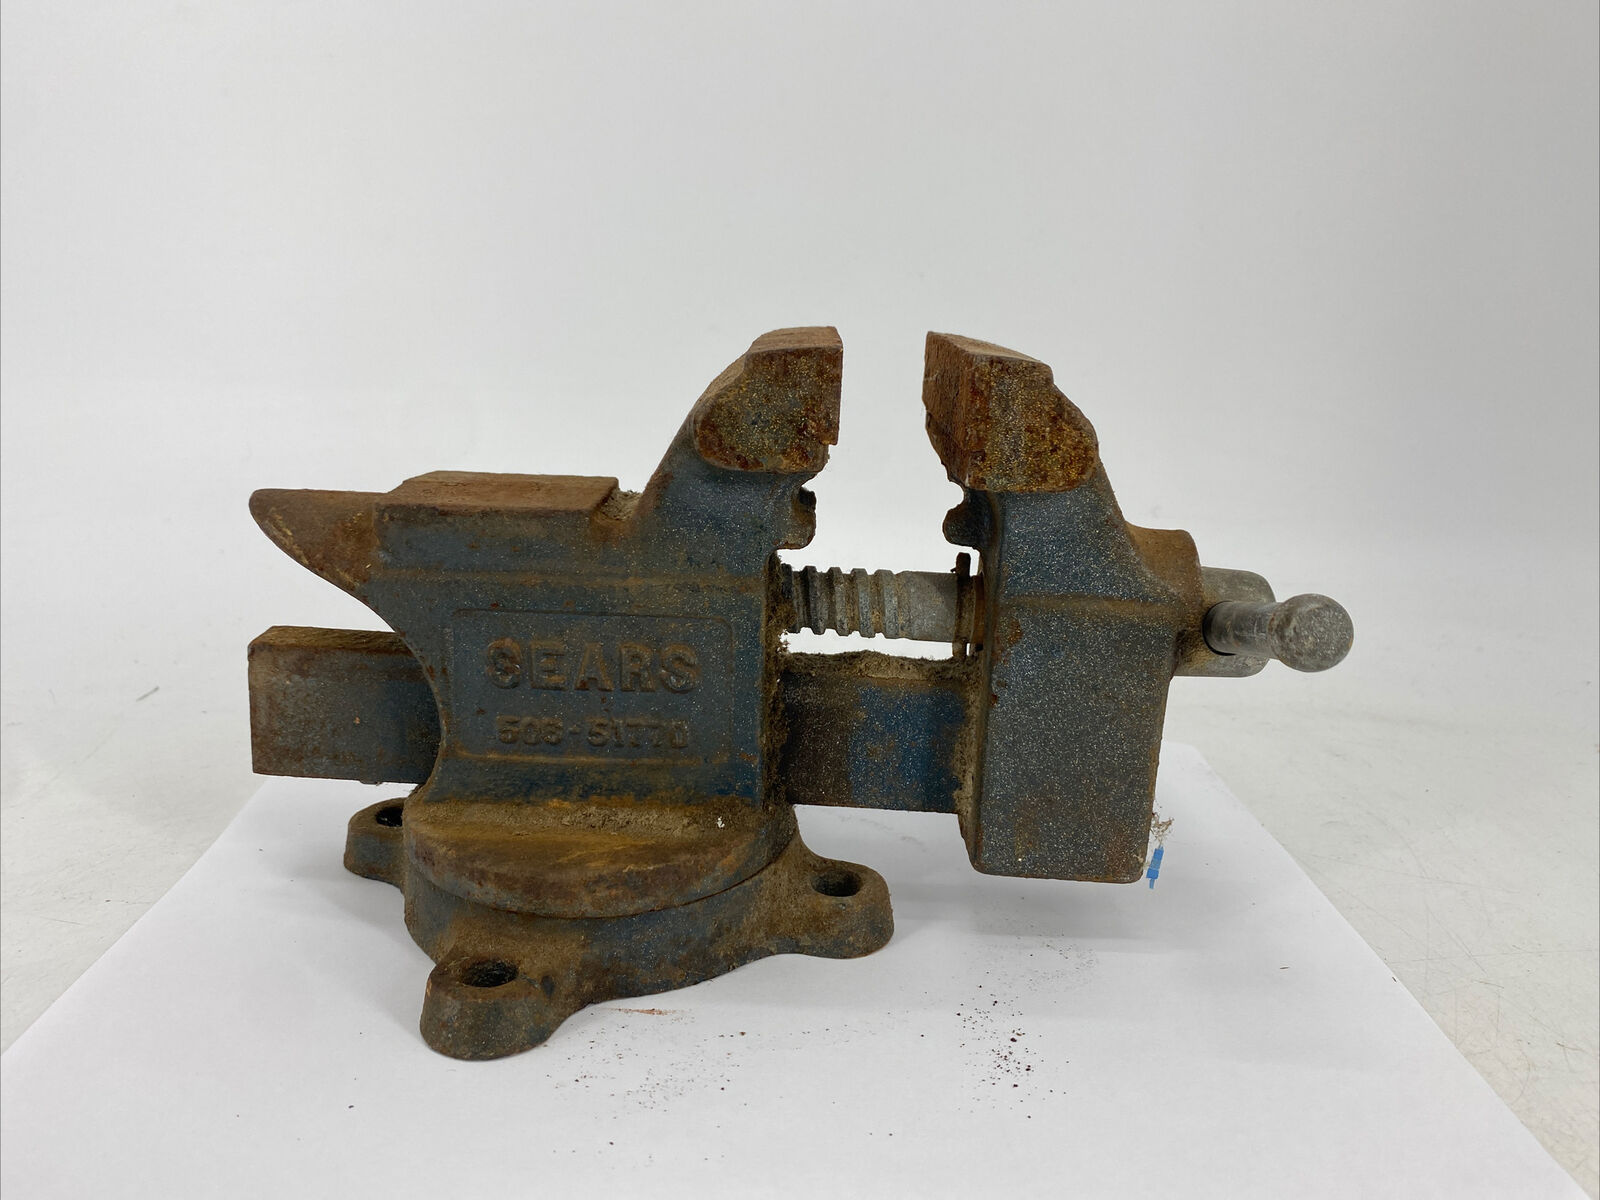 Vintage Sears 3 1/2” Bench Vise Swivels 506-51770 Made in USA